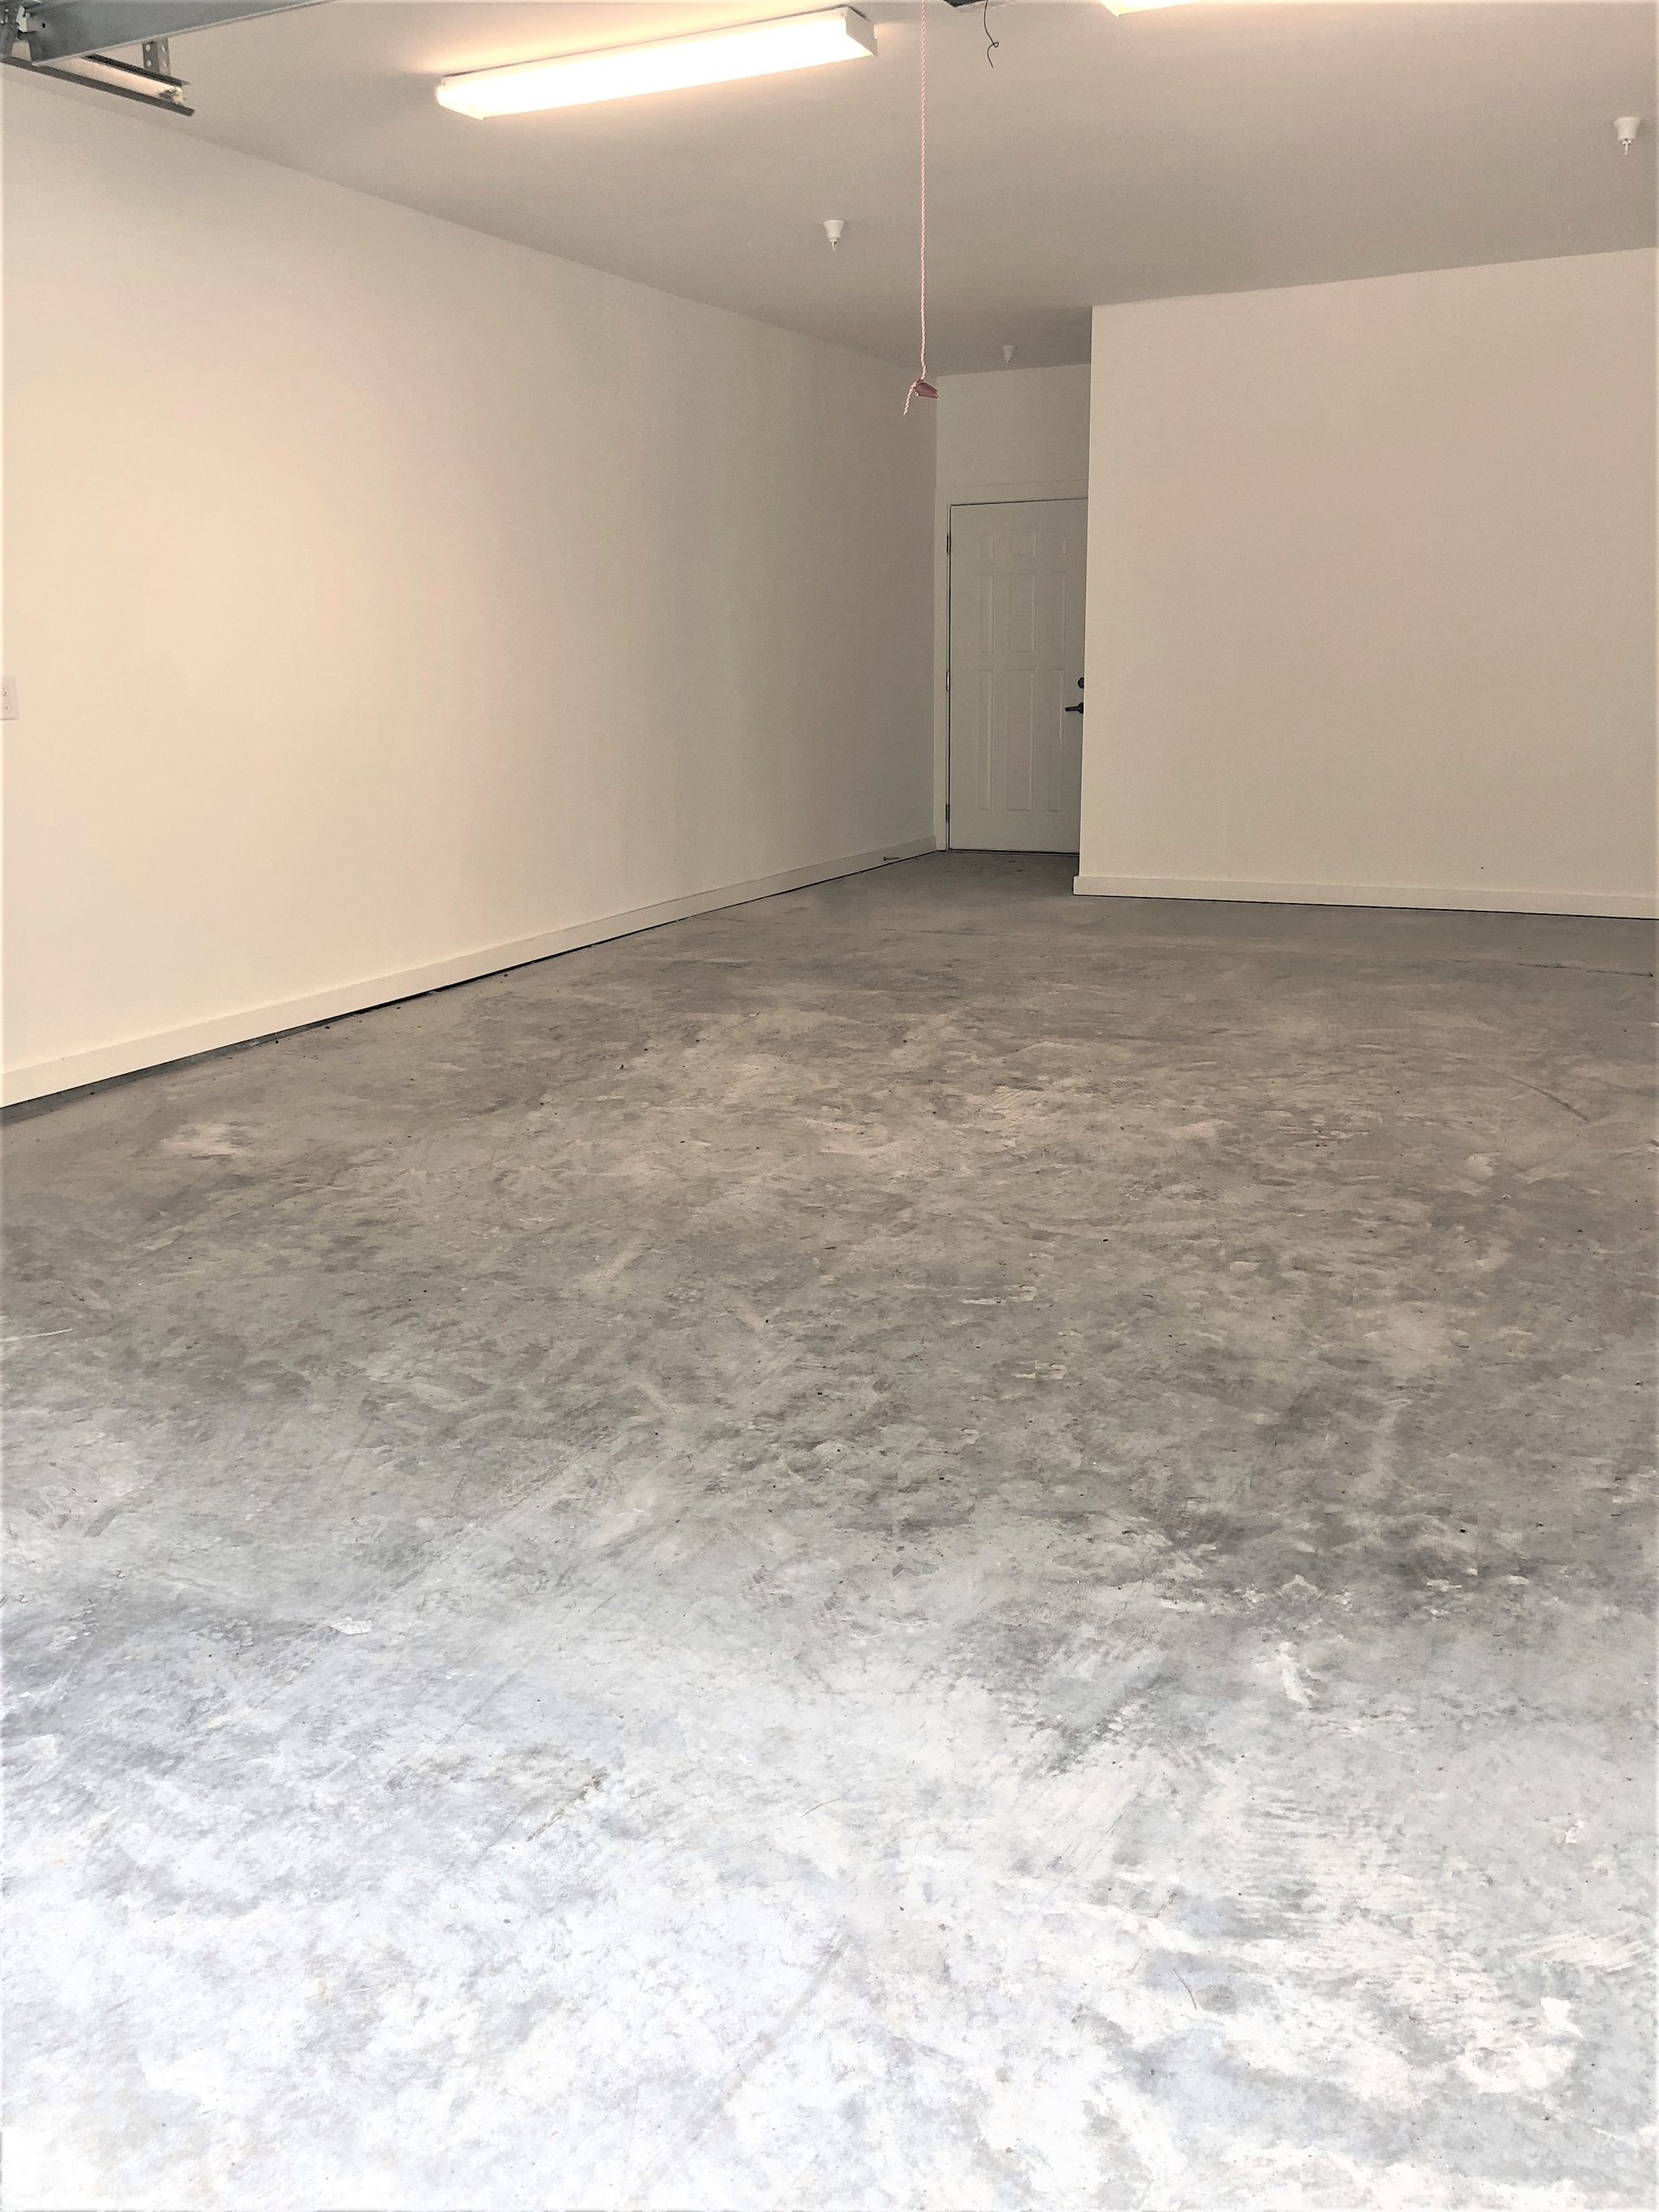 An expansive vacant room with a solid concrete floor.